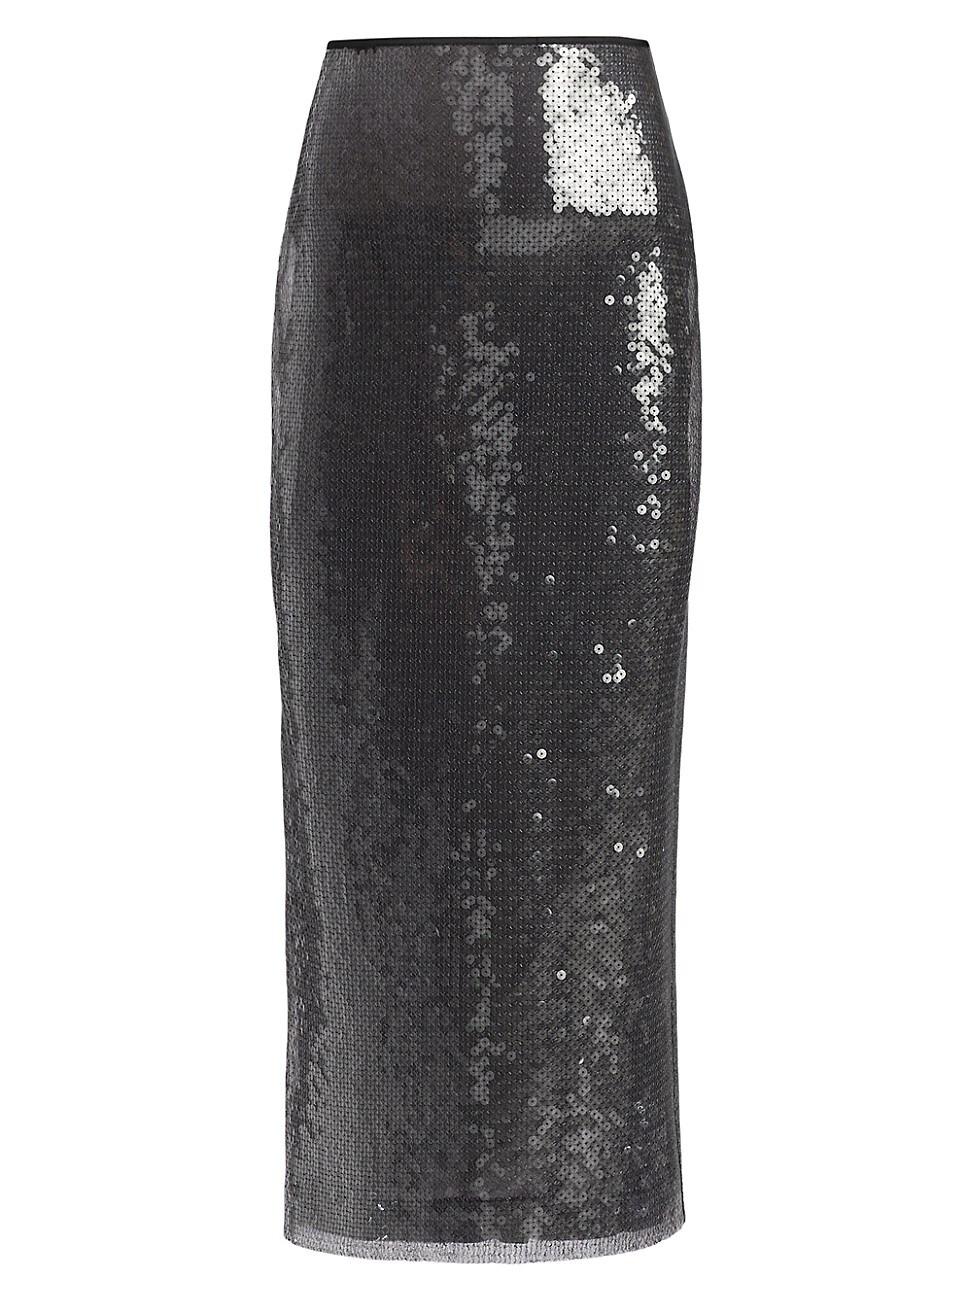 David Koma Sequin-embroidered Midi-skirt in Gray | Lyst